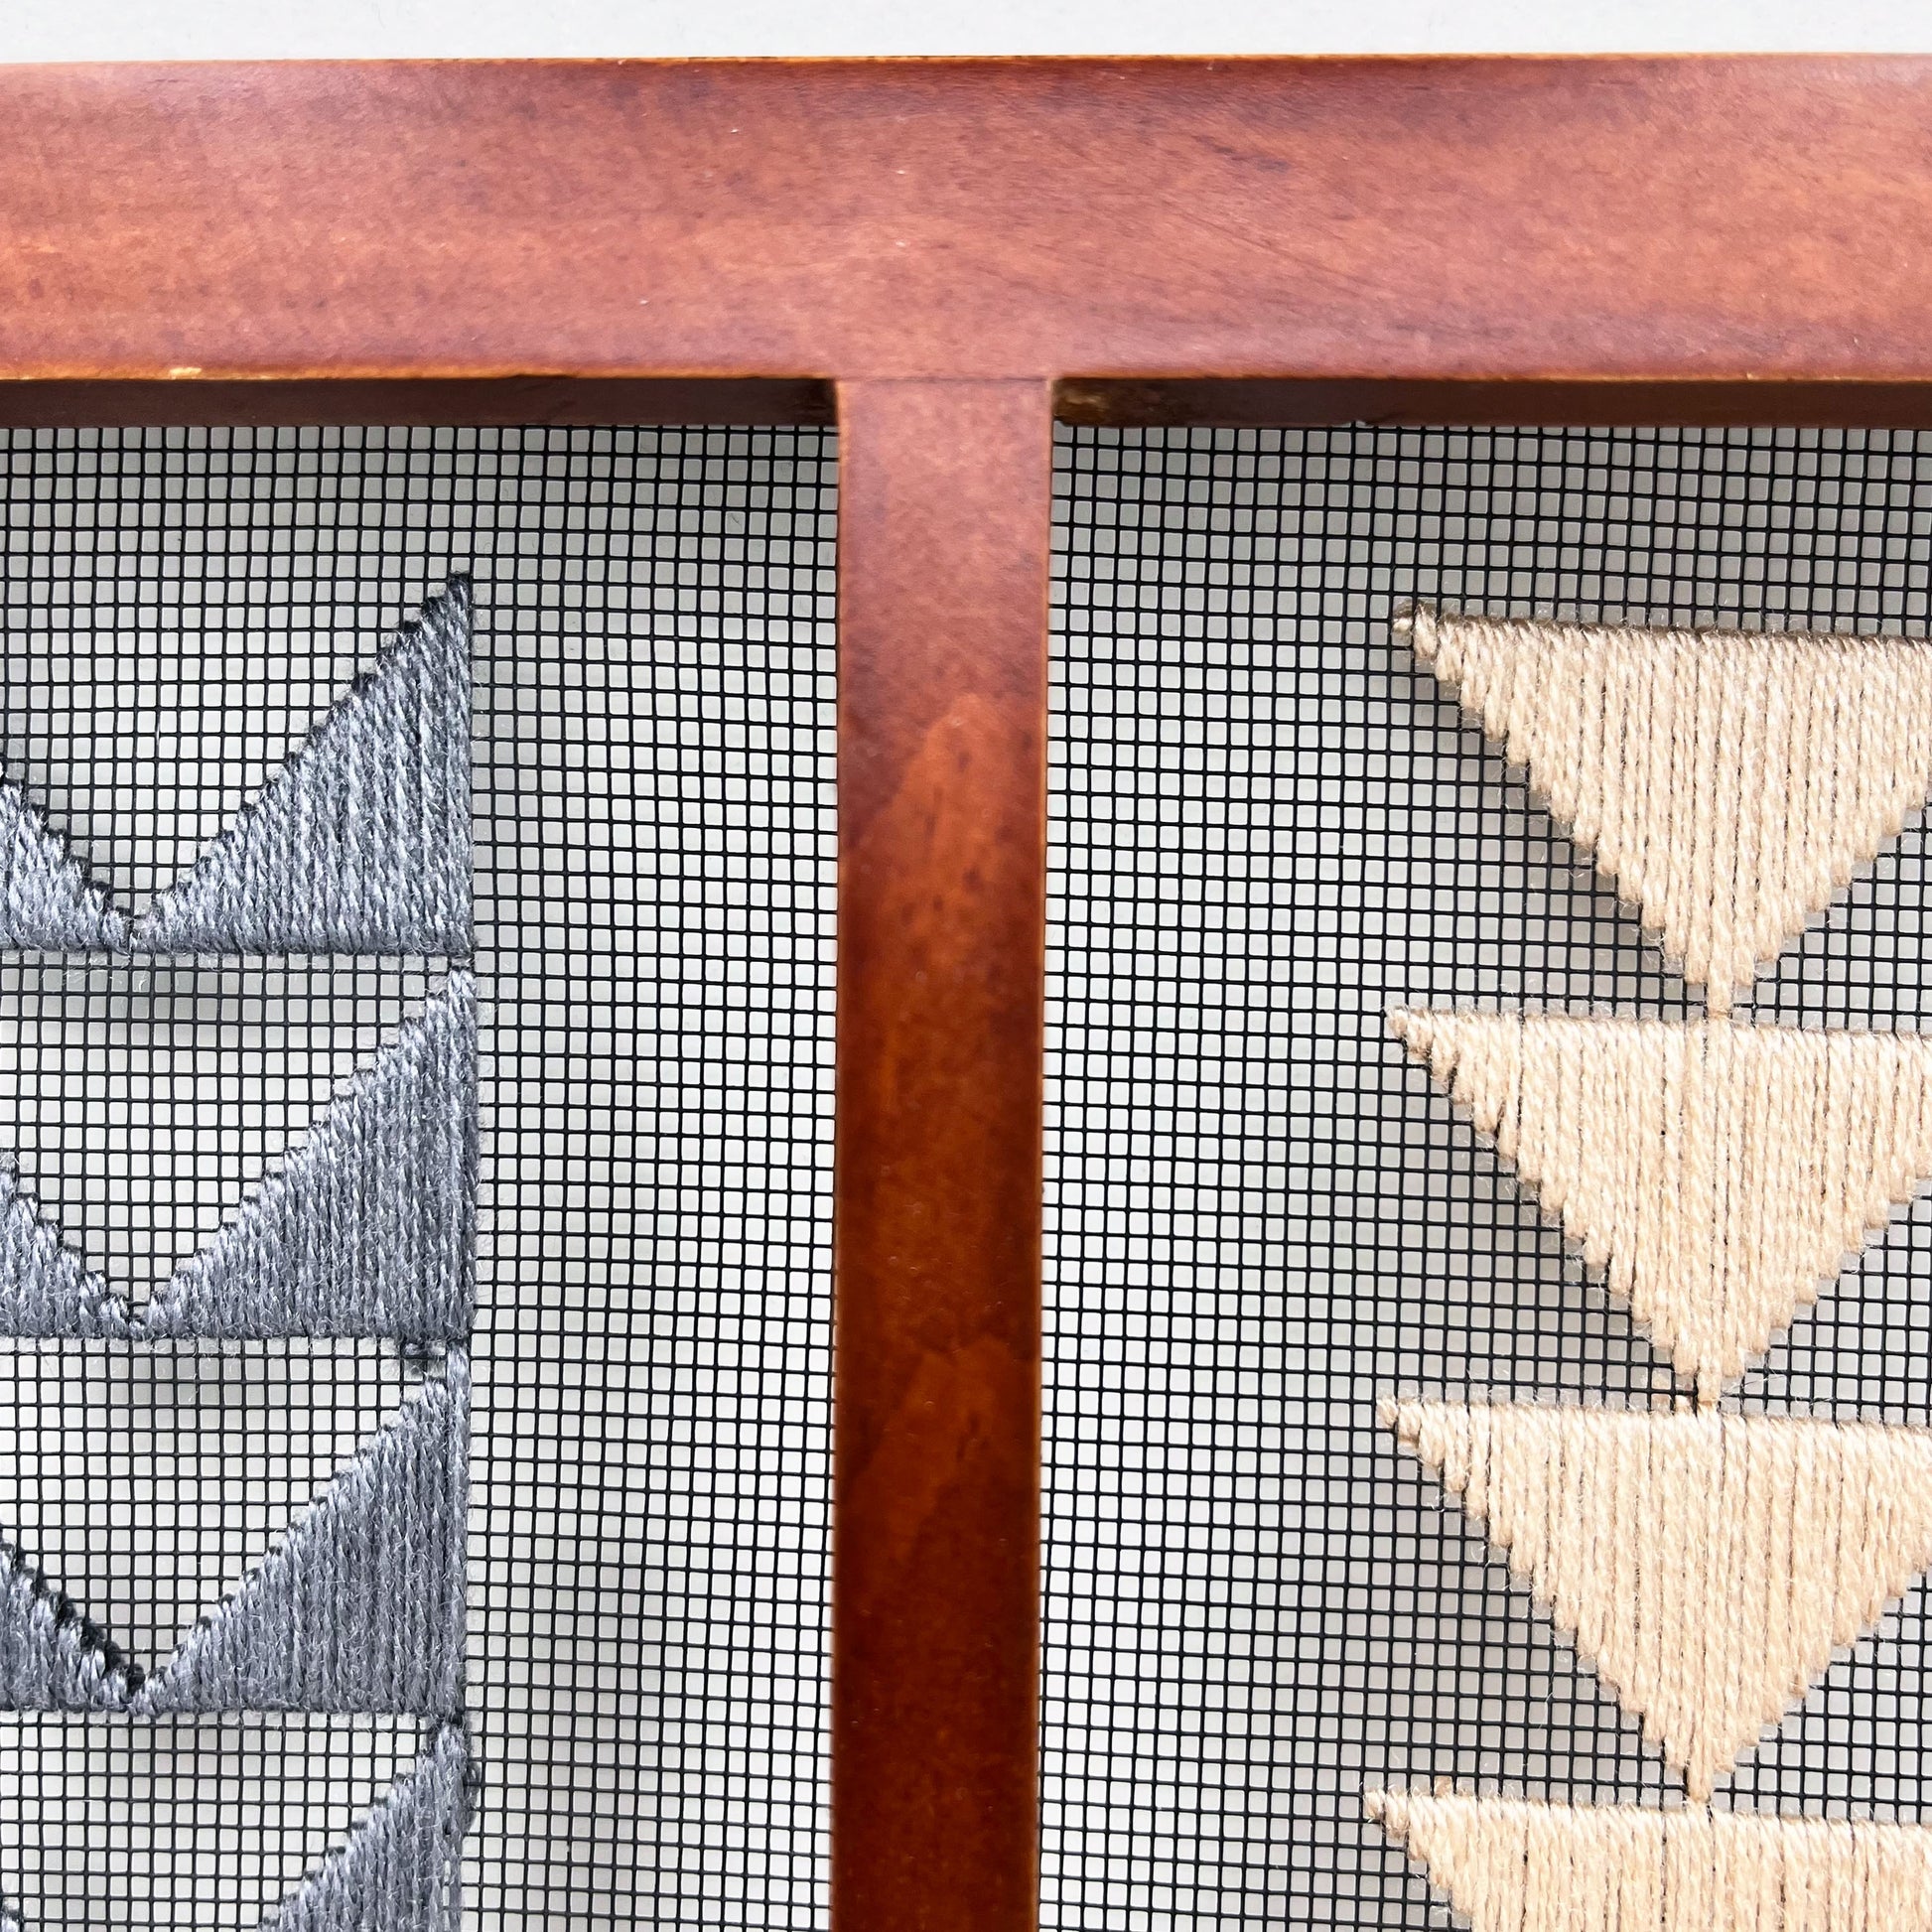 very close up abstract view of Small double panel wood frame holding window screen hand stitched with peach and grey triangles that form shapes of flying geese quilt pattern, on the left side a column of the border triangles in grey, on the right side the center triangles in peach